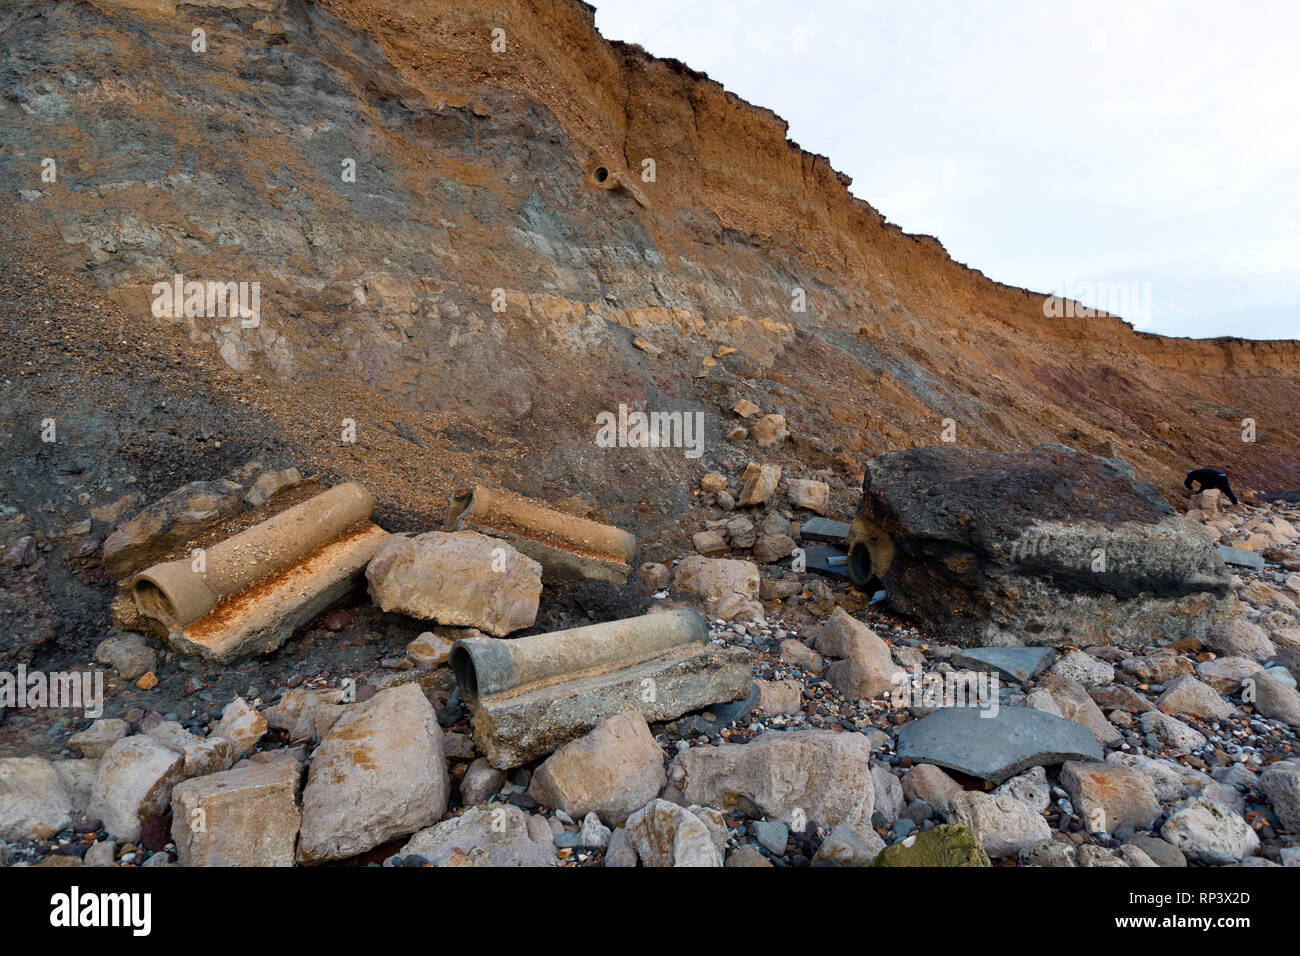 Coastal, Erosion, debris, on the, beach, pipes, cracks, cliffs, lower, greensand, wealden, beds, geology, Compton, Bay, Isle of Wight, UK, Stock Photo